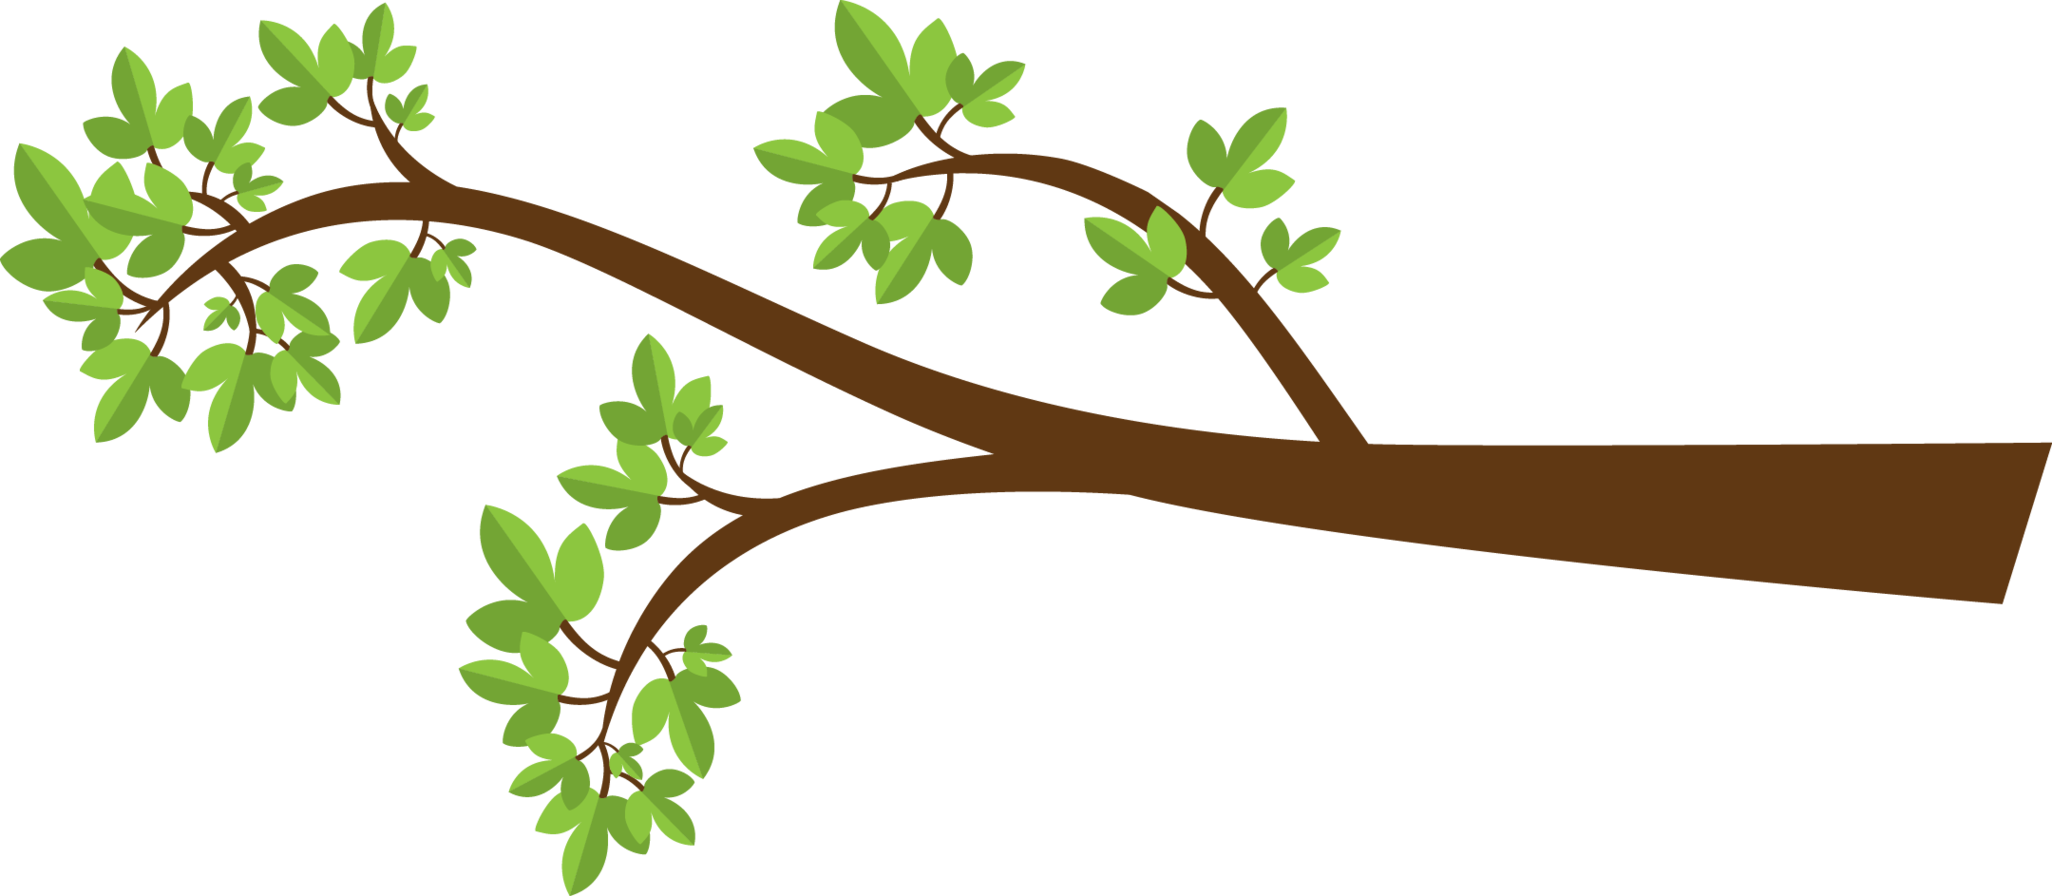 branch-branches-clipart-clipground